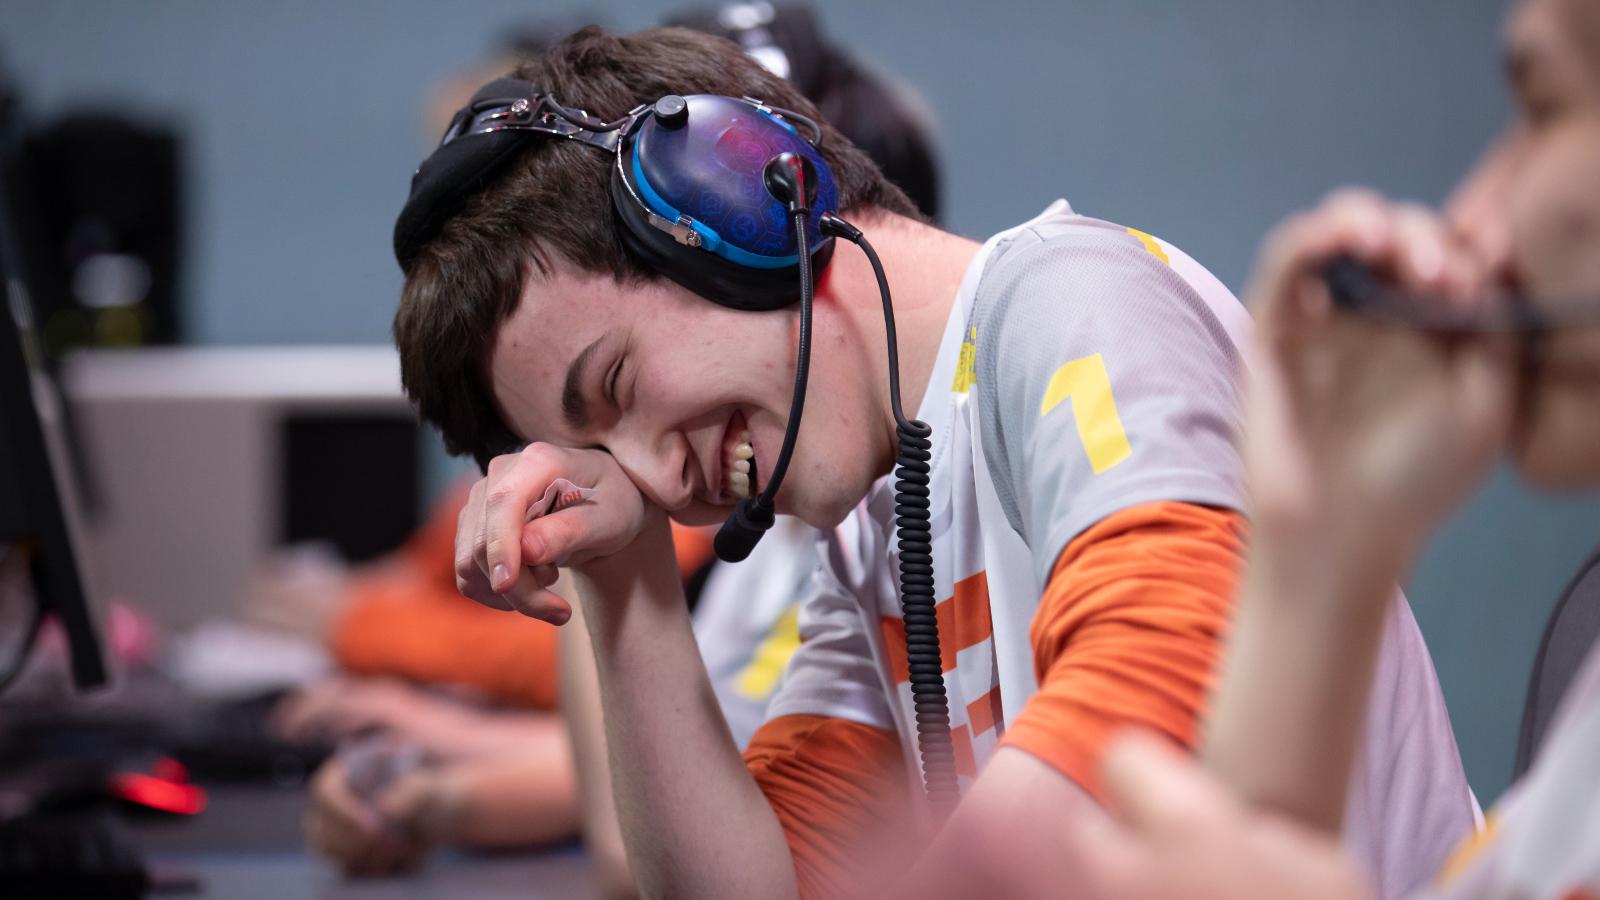 overwatch league owl san Francisco shock player matthew super delisi laughs into his hand